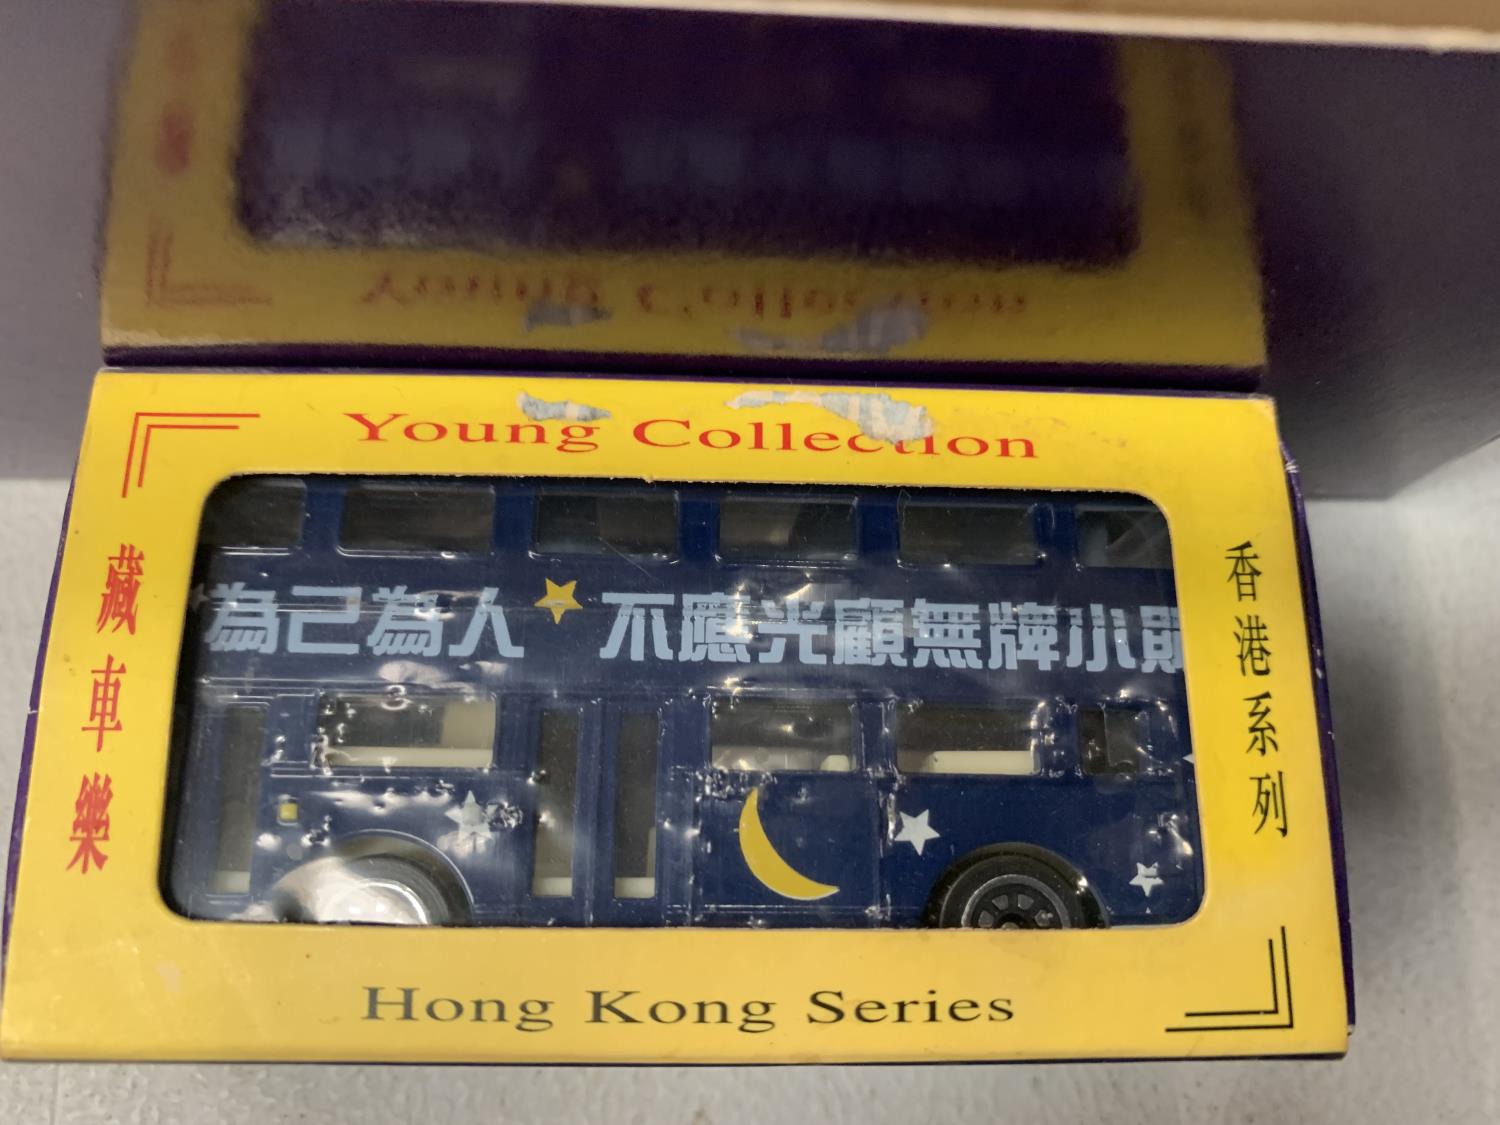 A BOXED CORGI BUS TO MARK THE CELEBRATION OF QUEEN ELIZABETH'S 75TH BIRTHDAY AND A HONG KONG - Image 3 of 3